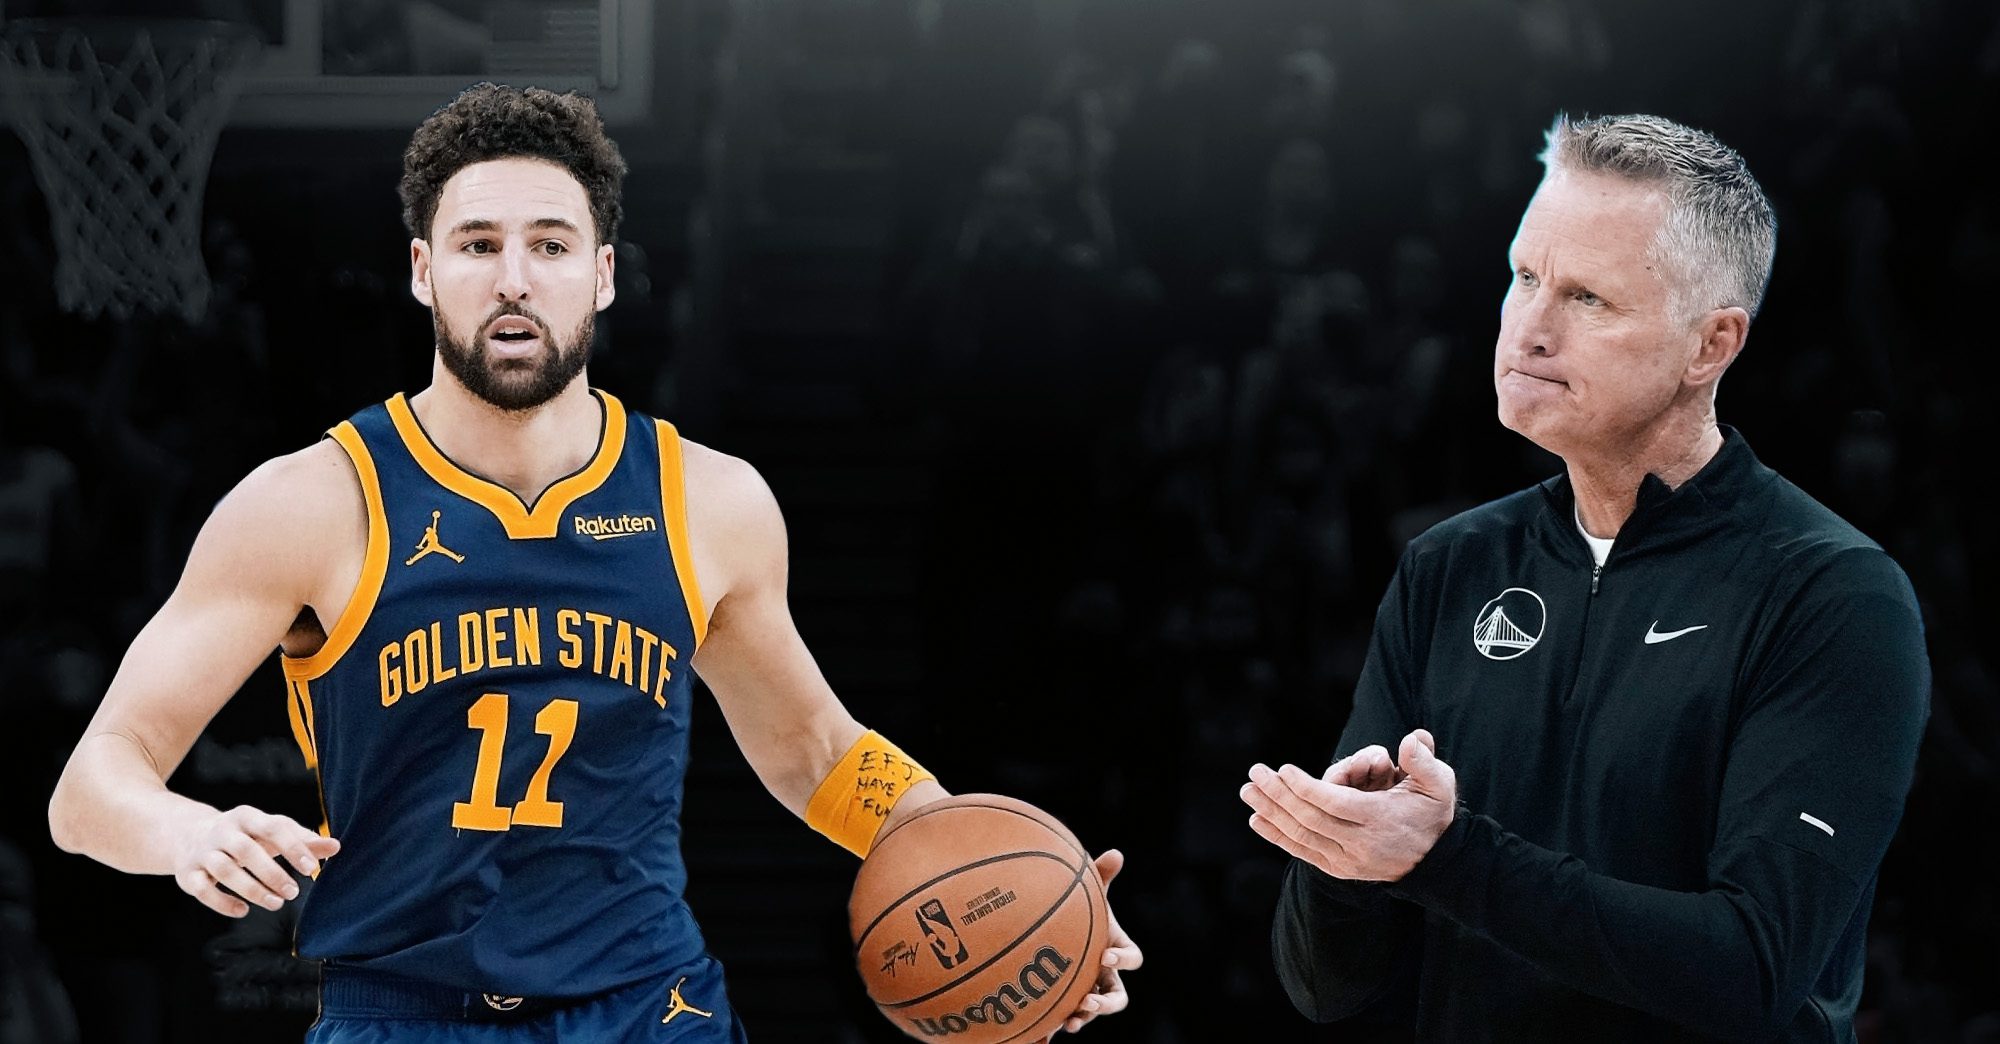 The Reminder From Steve Kerr That Got Klay Thompson Back on Track